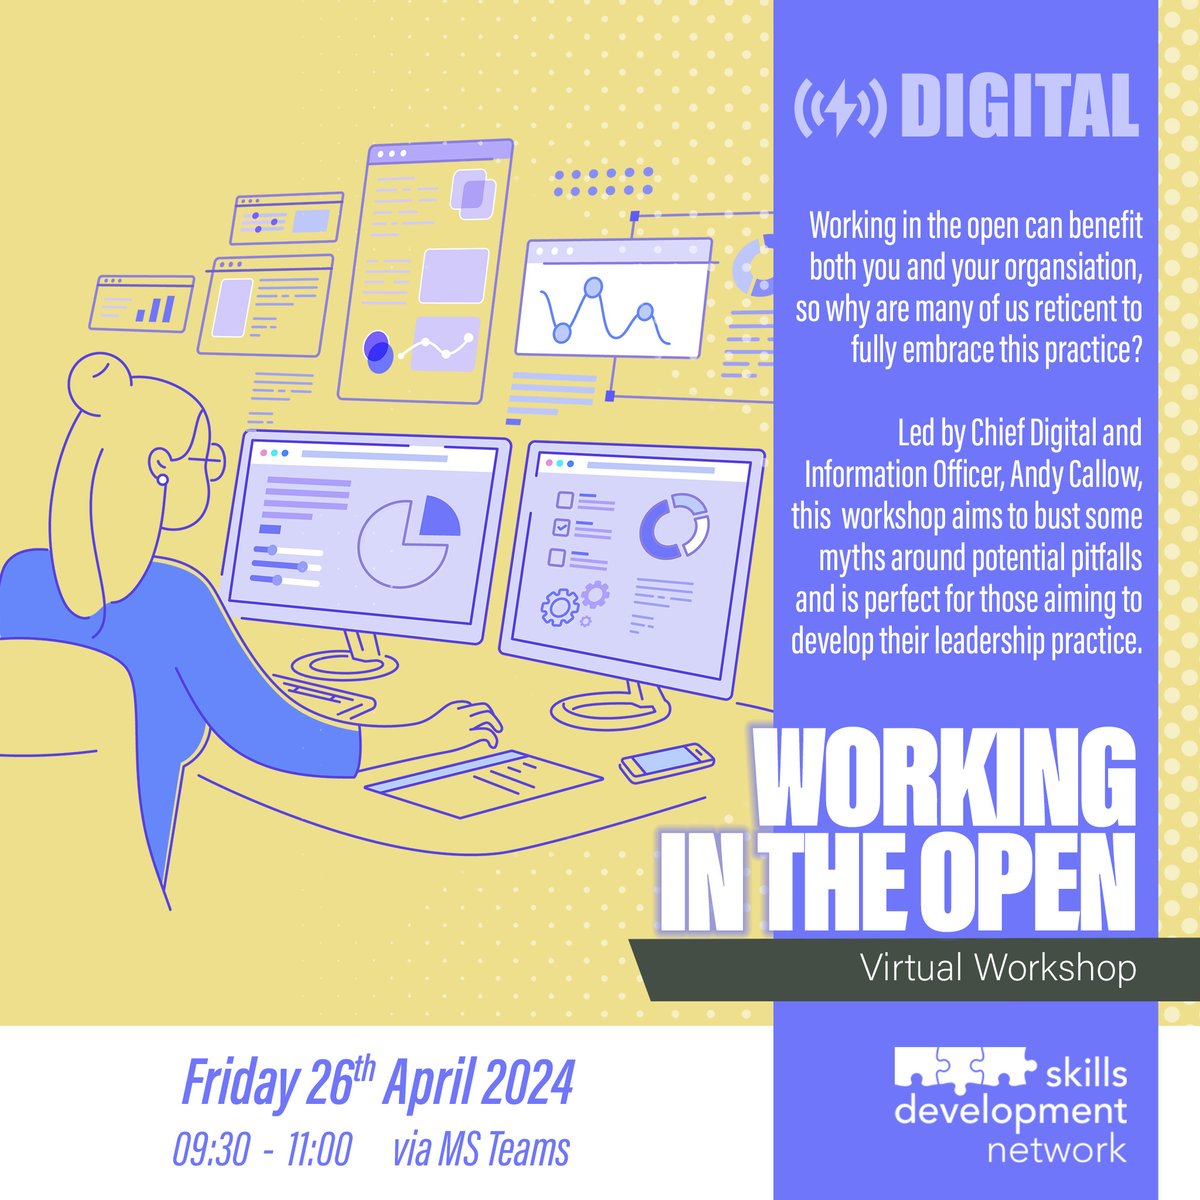 In an era of connectivity and collaboration, Working in the Open encourages stakeholder involvement, pushes for good governance, whilst providing transparency and authenticity - so why don't more of us work this way? Join @andy_callow to find out more: orlo.uk/ztHjP